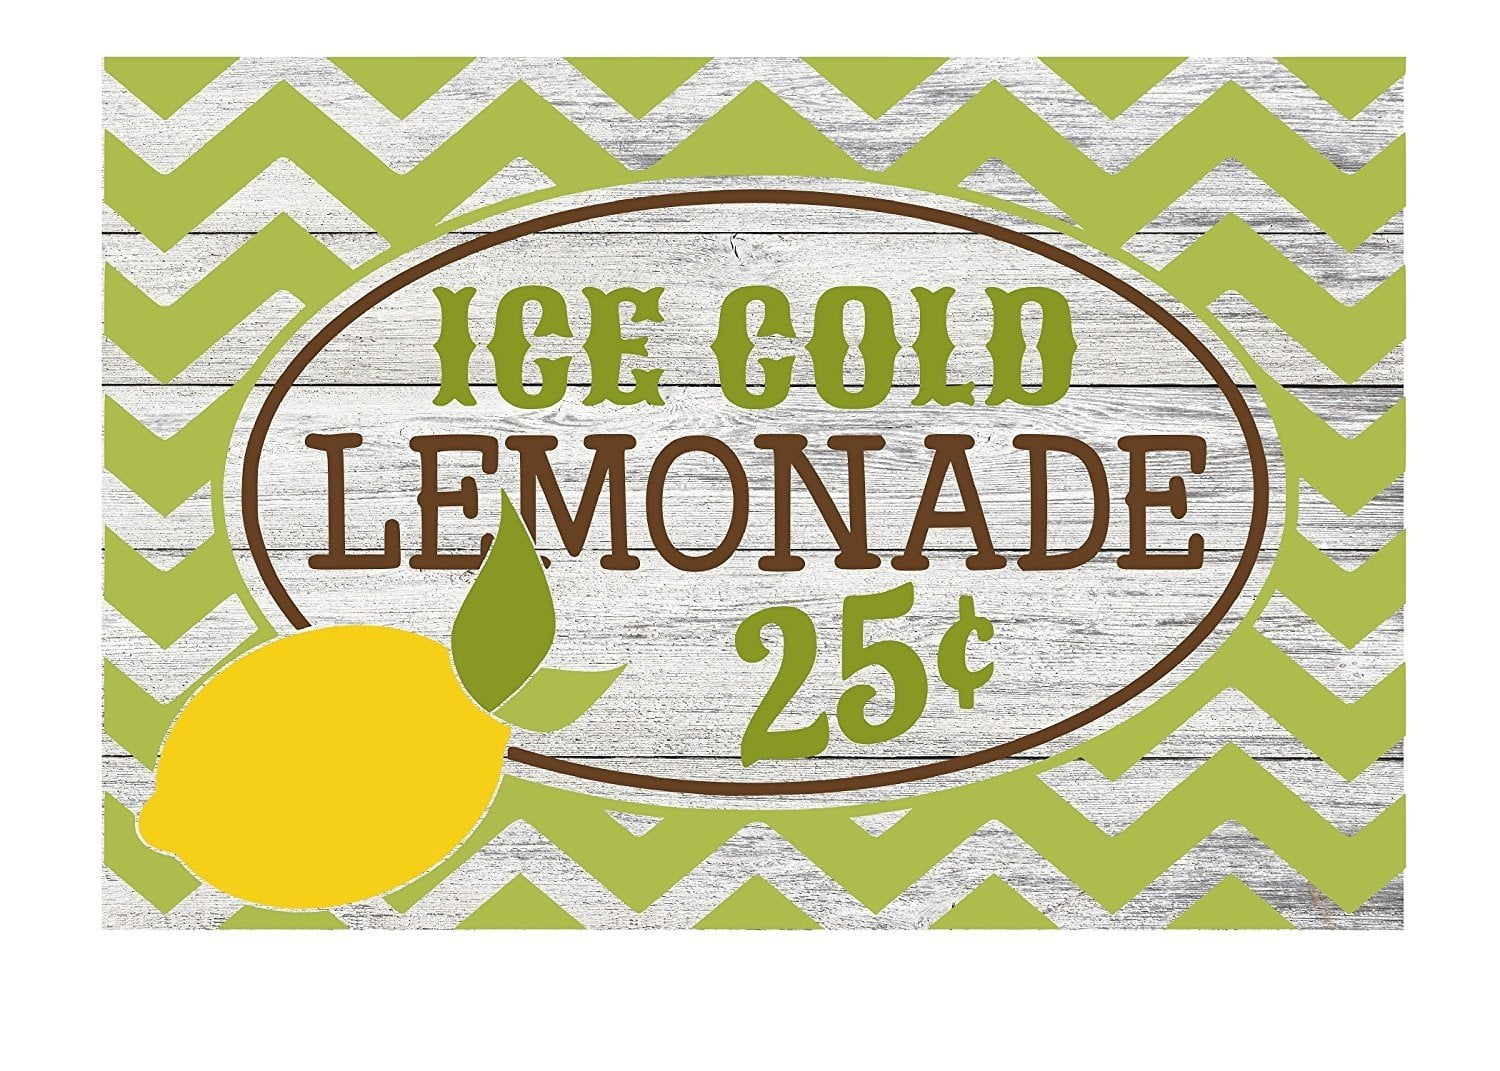 Ice Cold Lemonade 25 Cents Rustic Kitchen Metal Sign 12" x 8